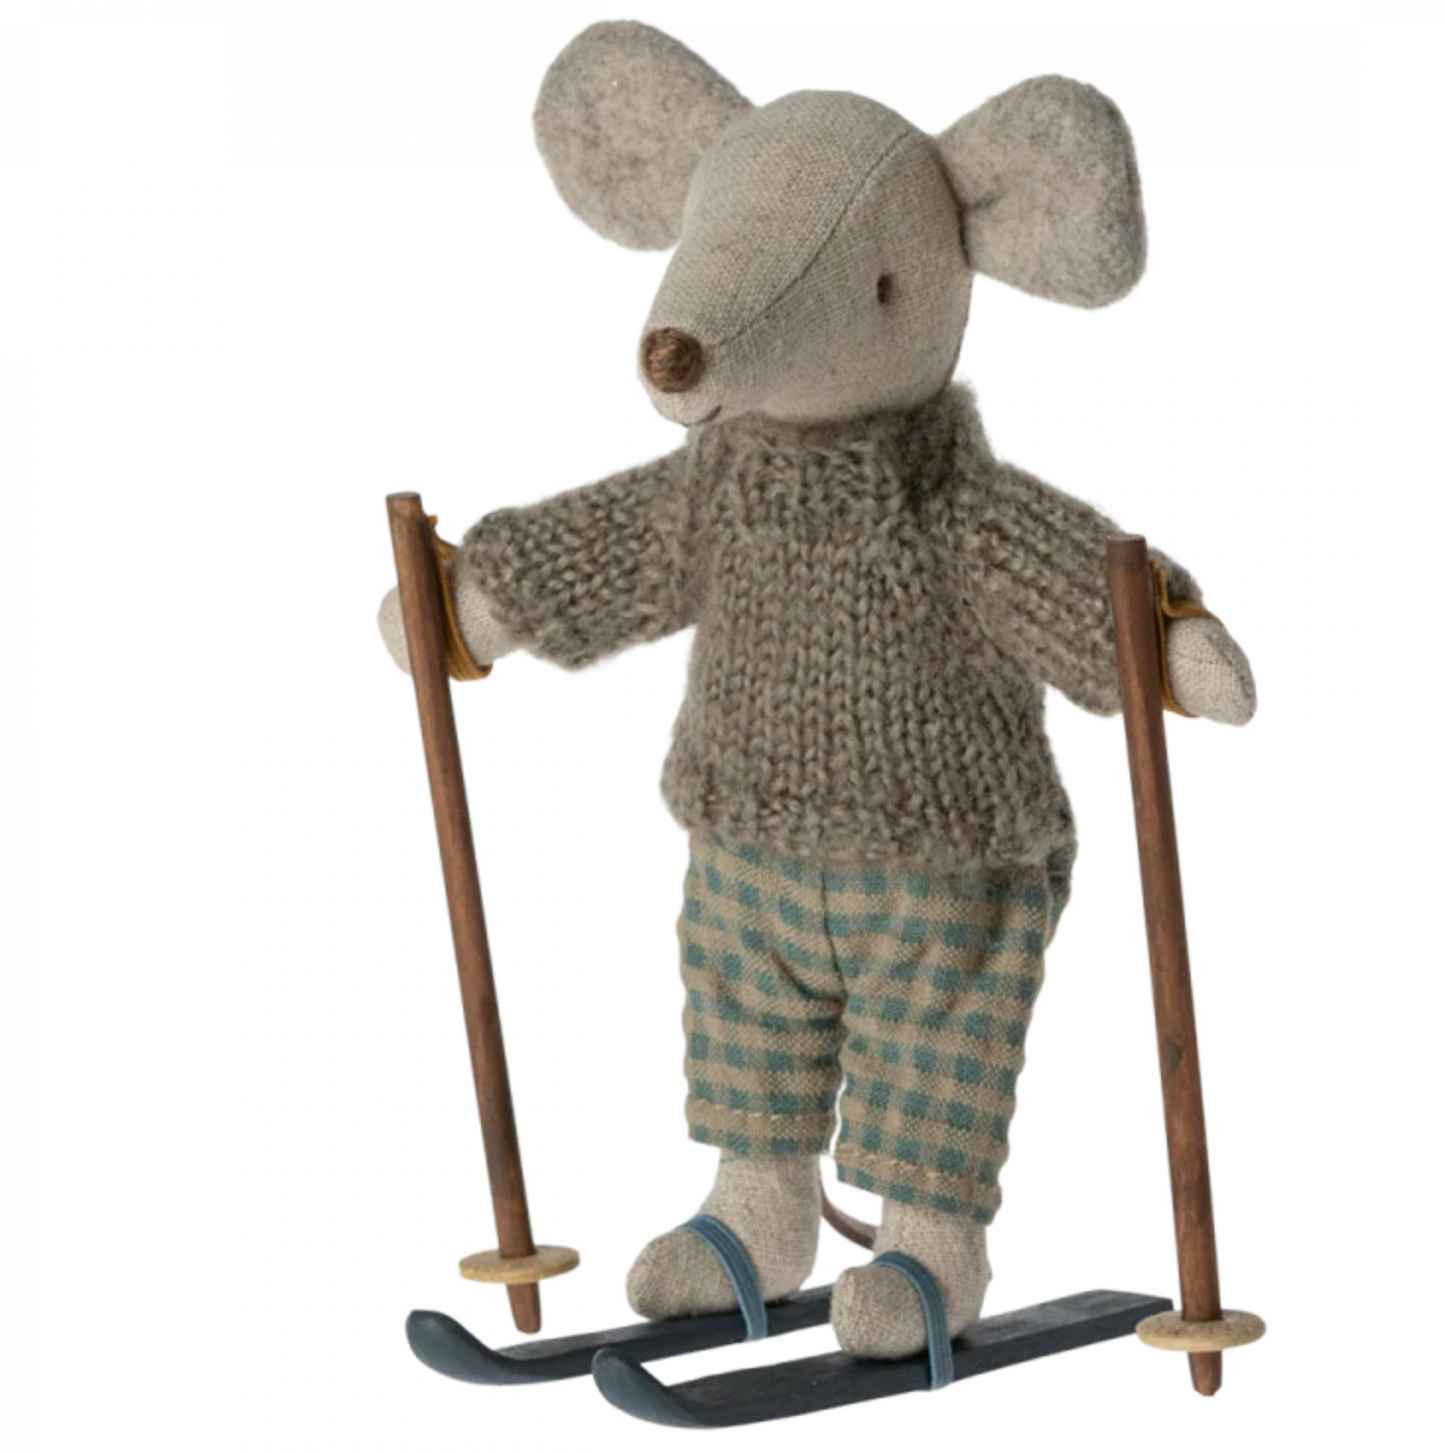 Maileg Winter mouse with ski s4et, Big brother